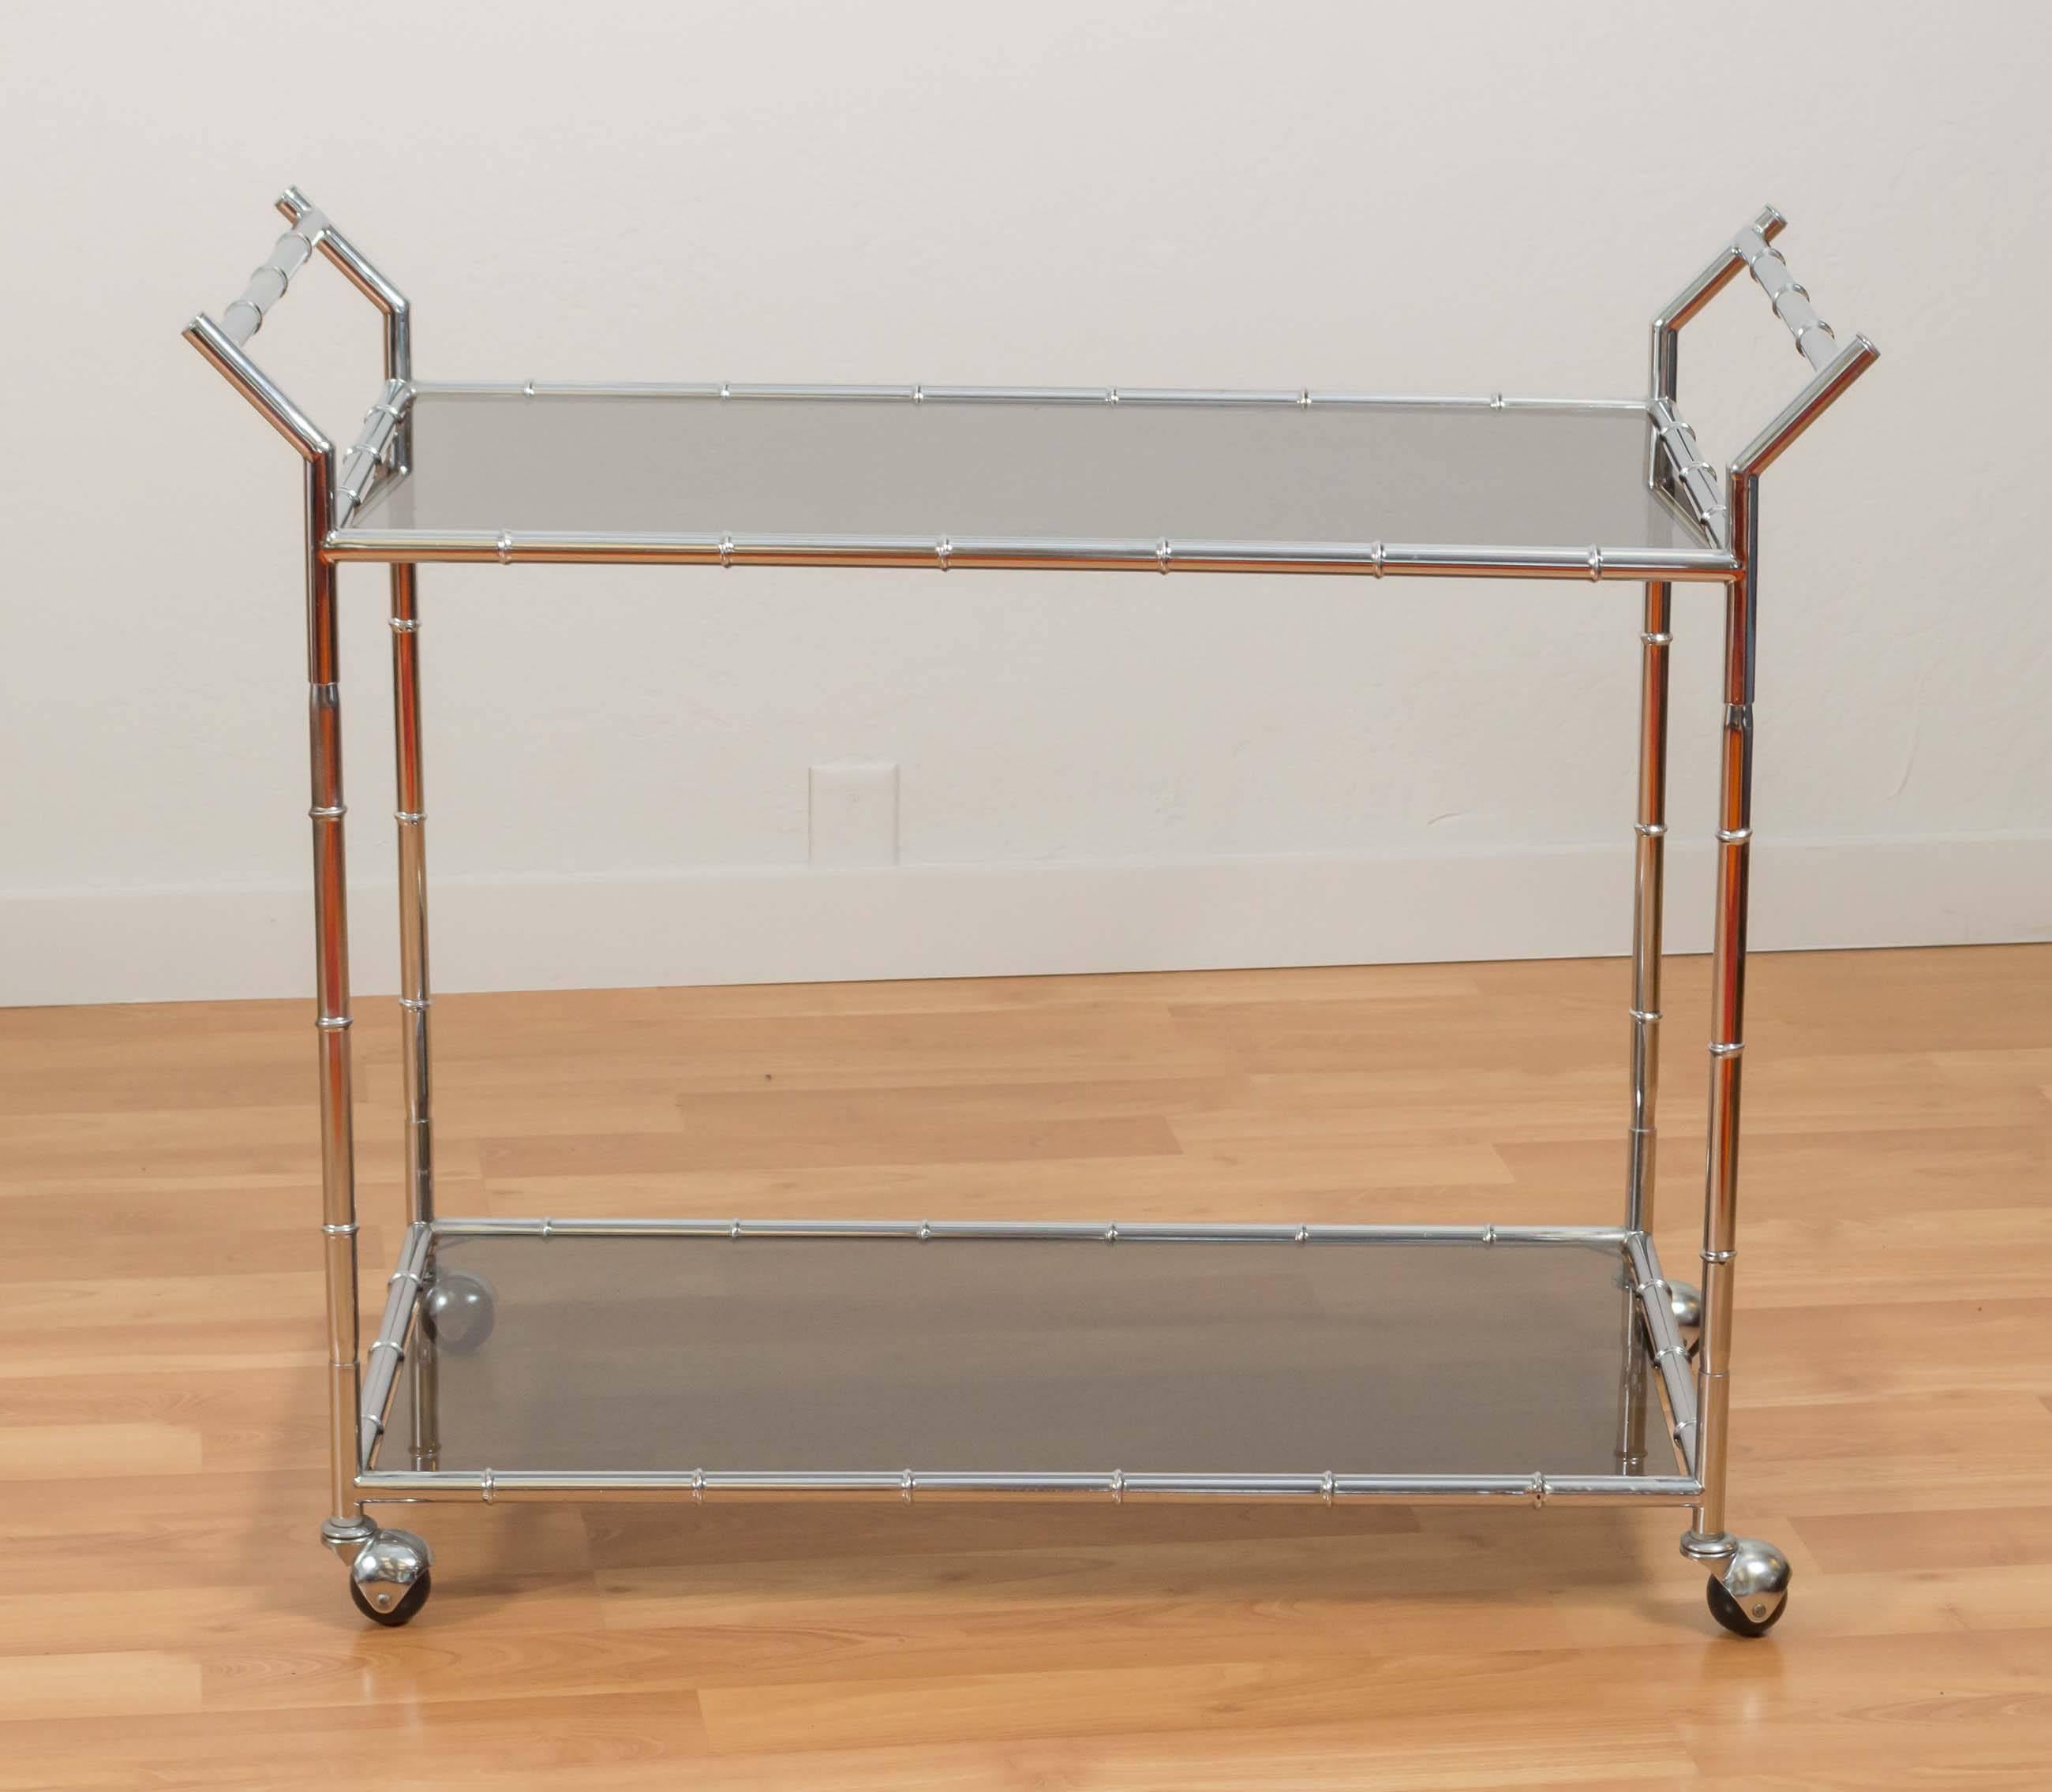 A Hollywood Regency-style faux bamboo chrome serving or bar cart with smoke glass shelves.

Its impeccably-fabricated and finished dual-handle chrome frame is in very nice condition over all, and it navigates smoothly on metal hooded ball casters.